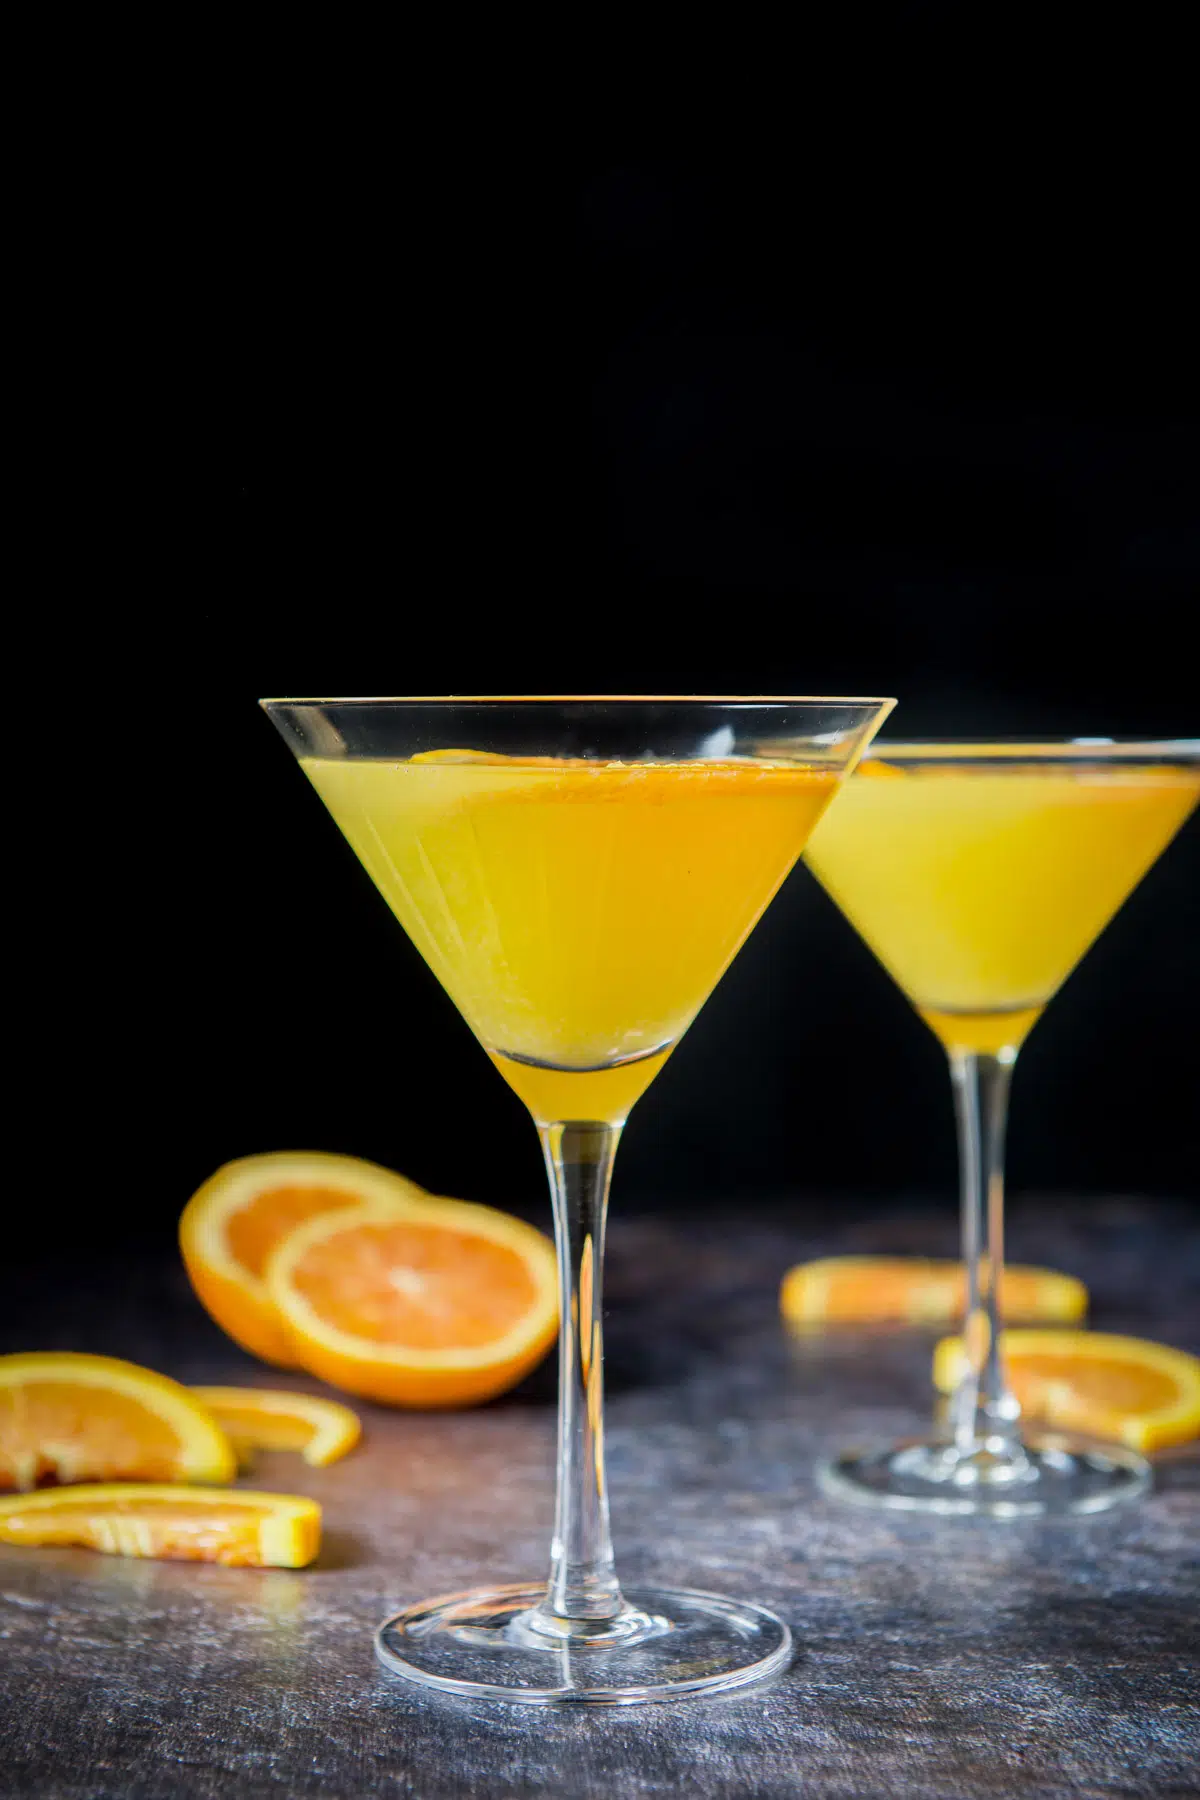 Vertical view of two glasses with the orange martini in it